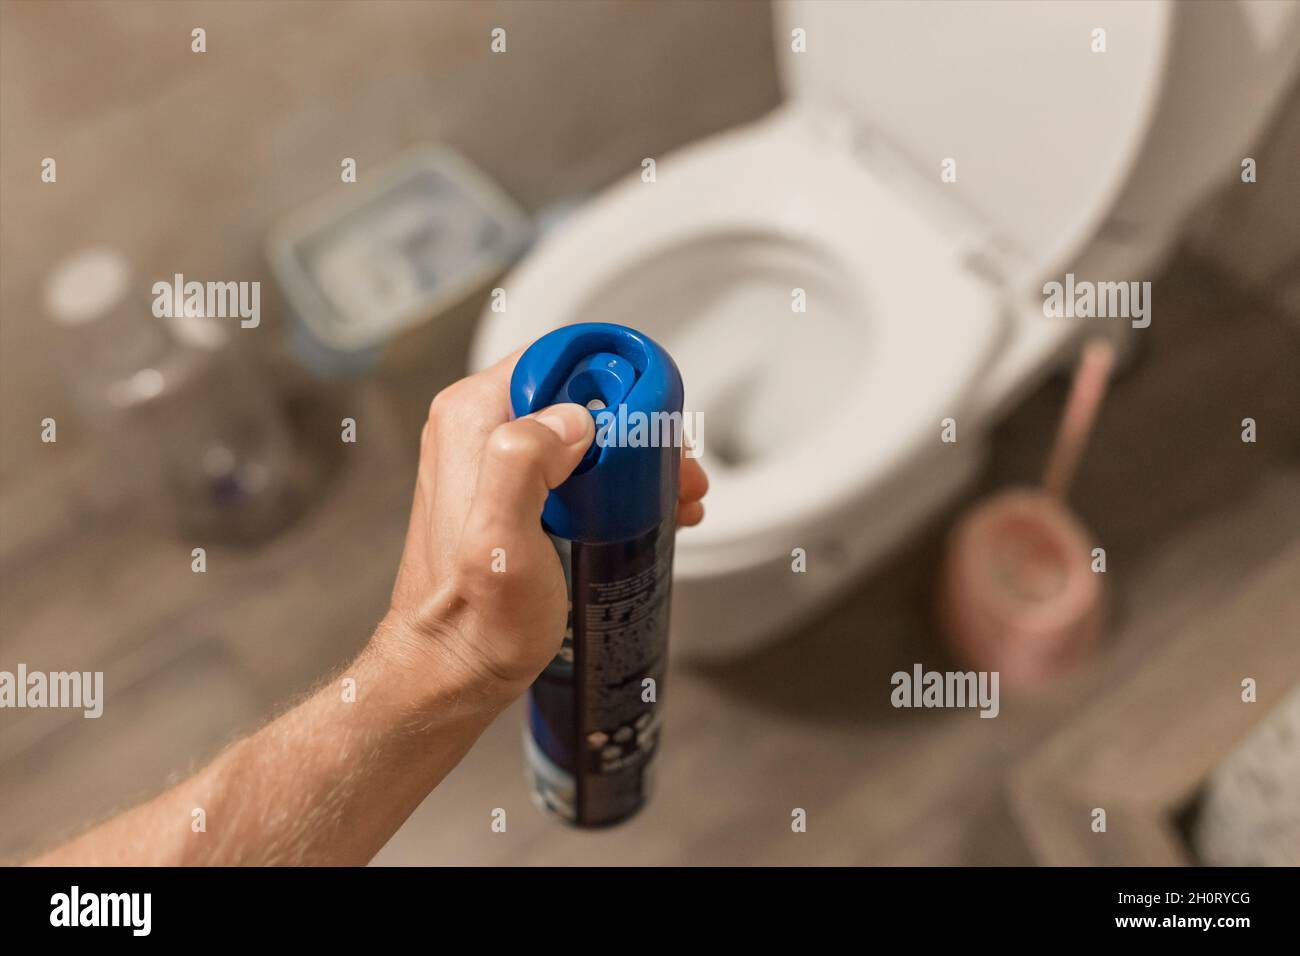 The guy's hand holds and sprays the air freshener in the toilet or bathroom. Home Hygiene Concept. Stock Photo